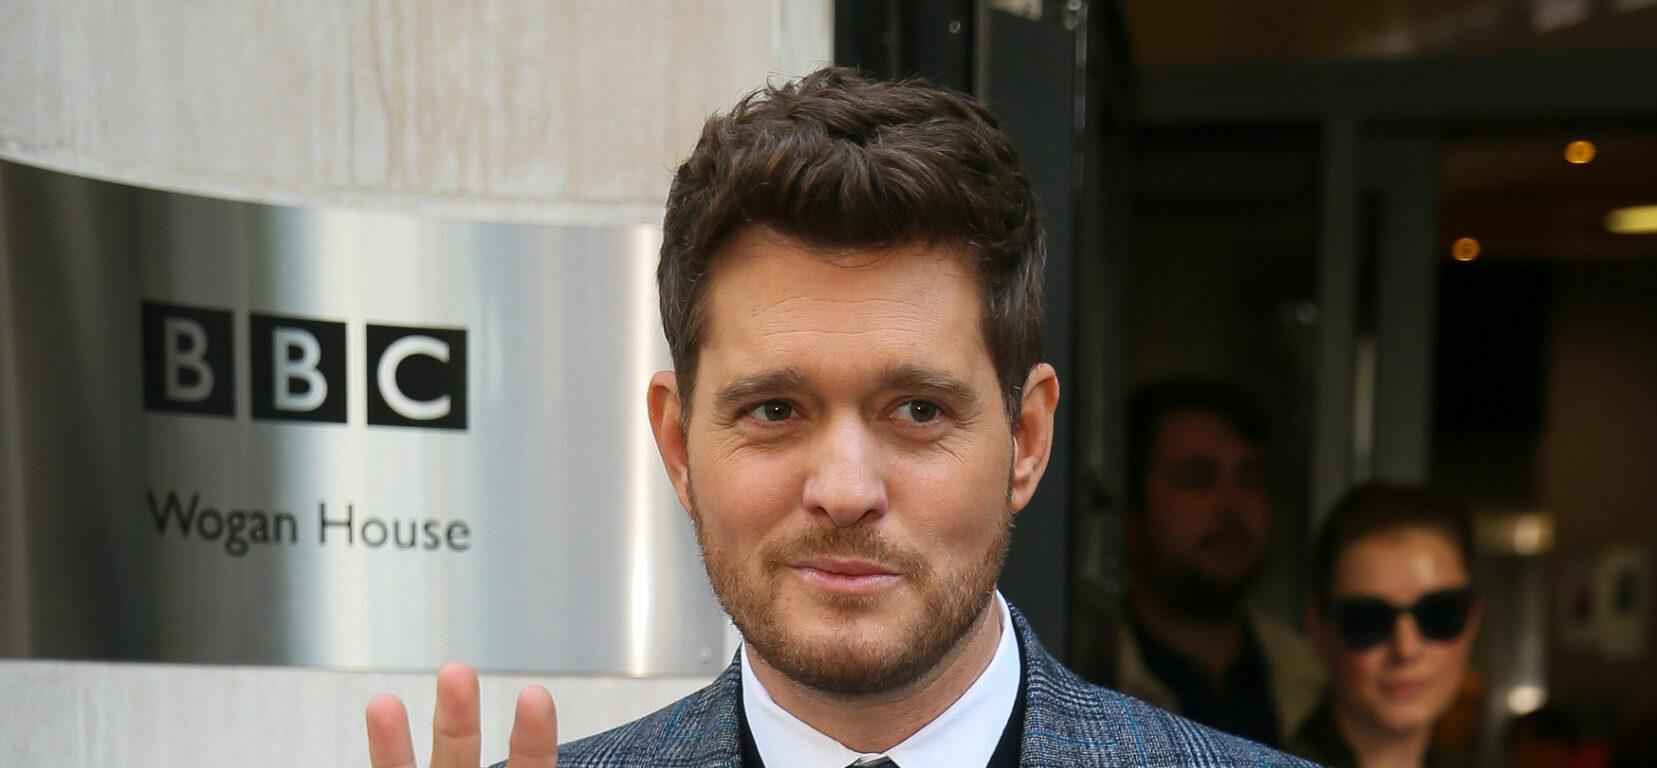 Singer Michael Buble seen leaving BBC Radio Two Studios after appearing on Chris Evans Breakfast show - London